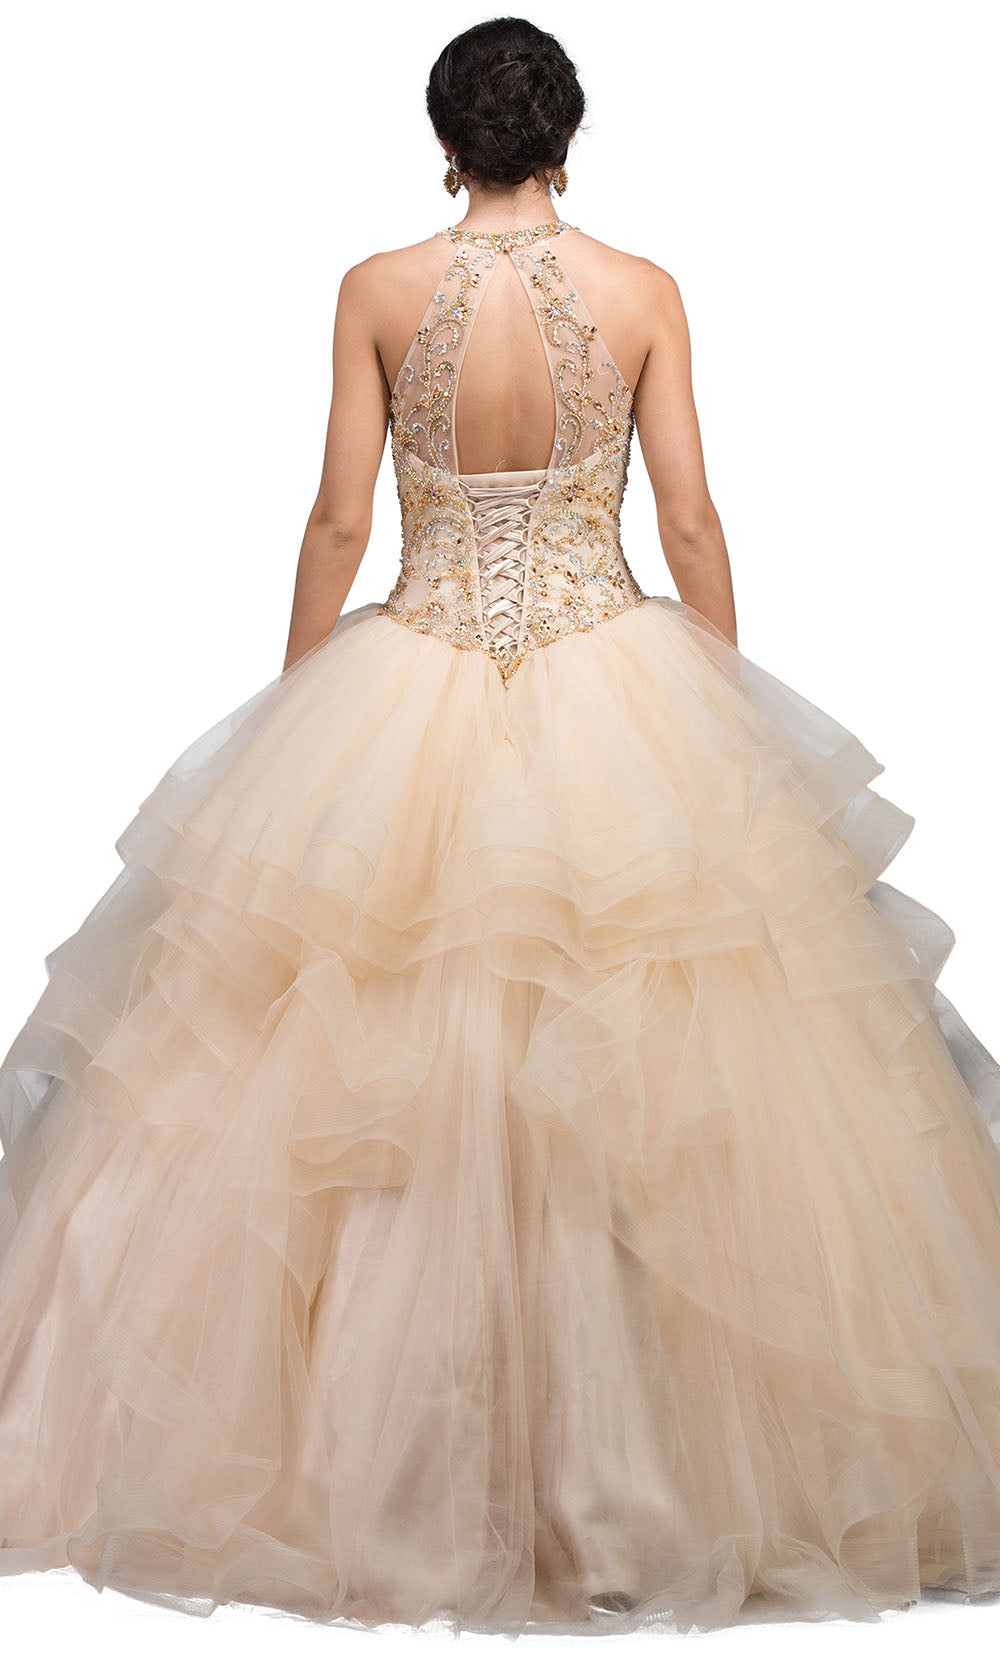 Dancing Queen - 1231 Halter Crystal Beaded Ballgown In Neutral and Gold